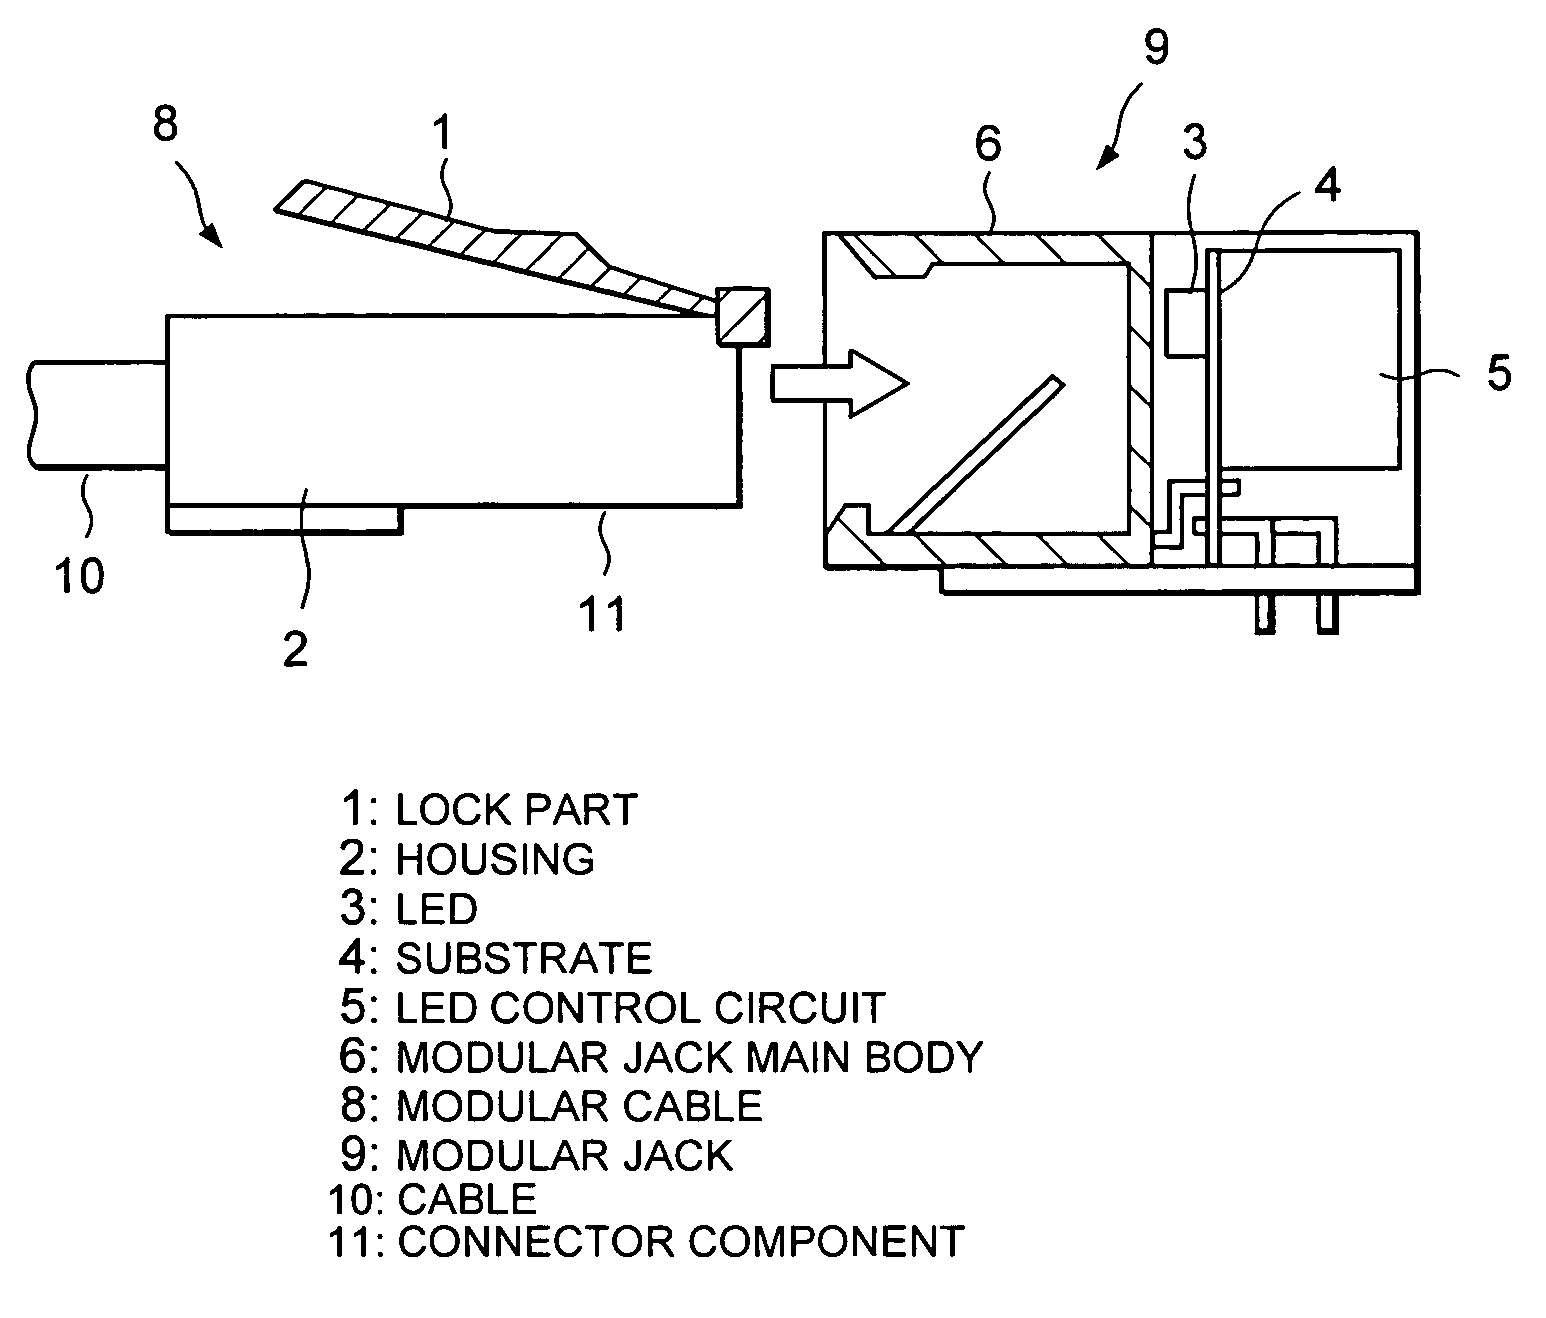 Connector component and connector assembly